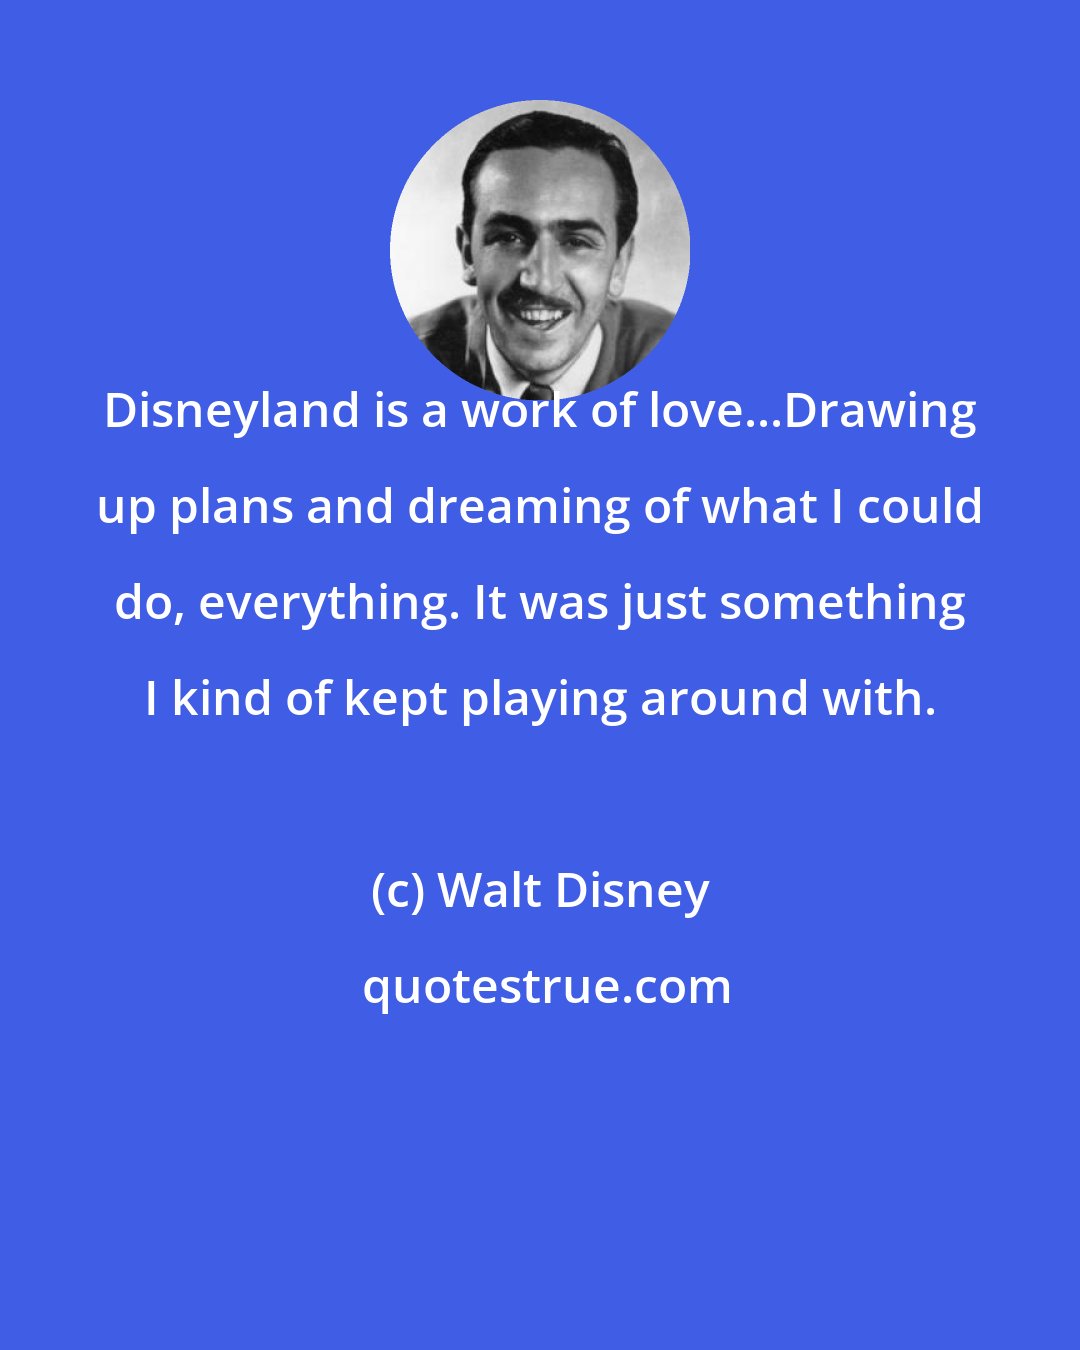 Walt Disney: Disneyland is a work of love...Drawing up plans and dreaming of what I could do, everything. It was just something I kind of kept playing around with.